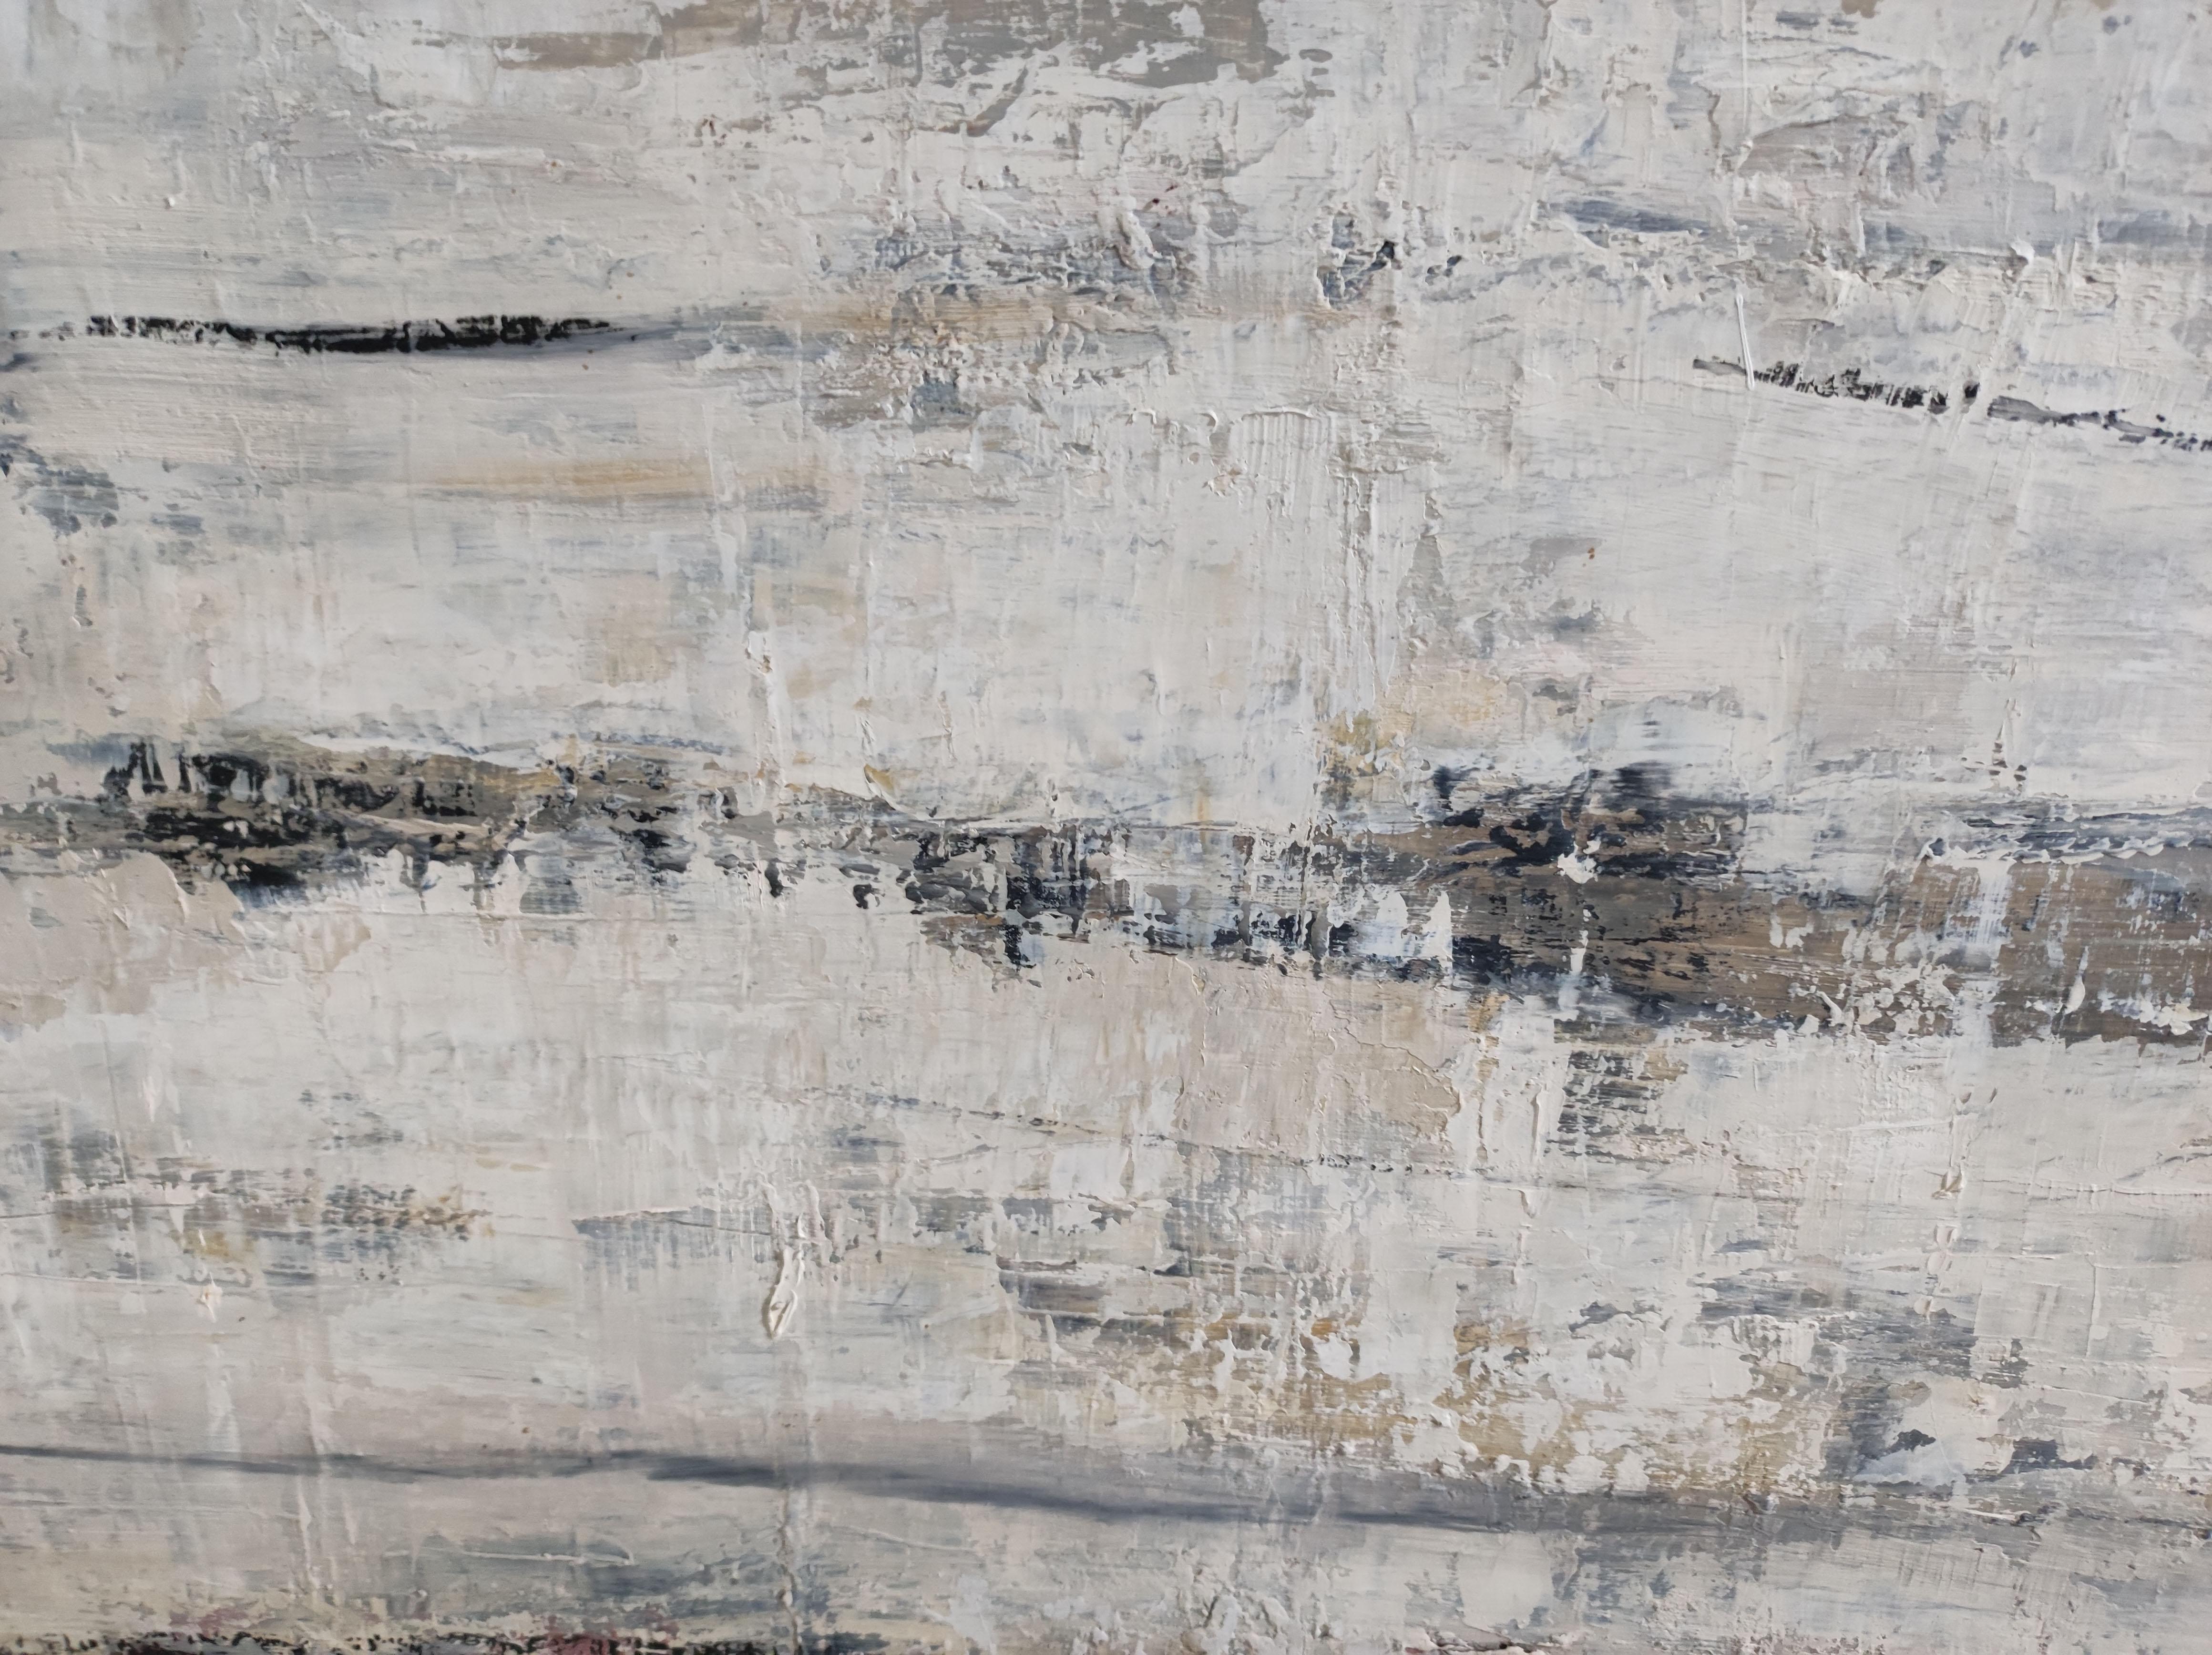 Hiver, abstract landscape, monochrome, minimalism, white expressionism, oil - Gray Abstract Painting by SOPHIE DUMONT